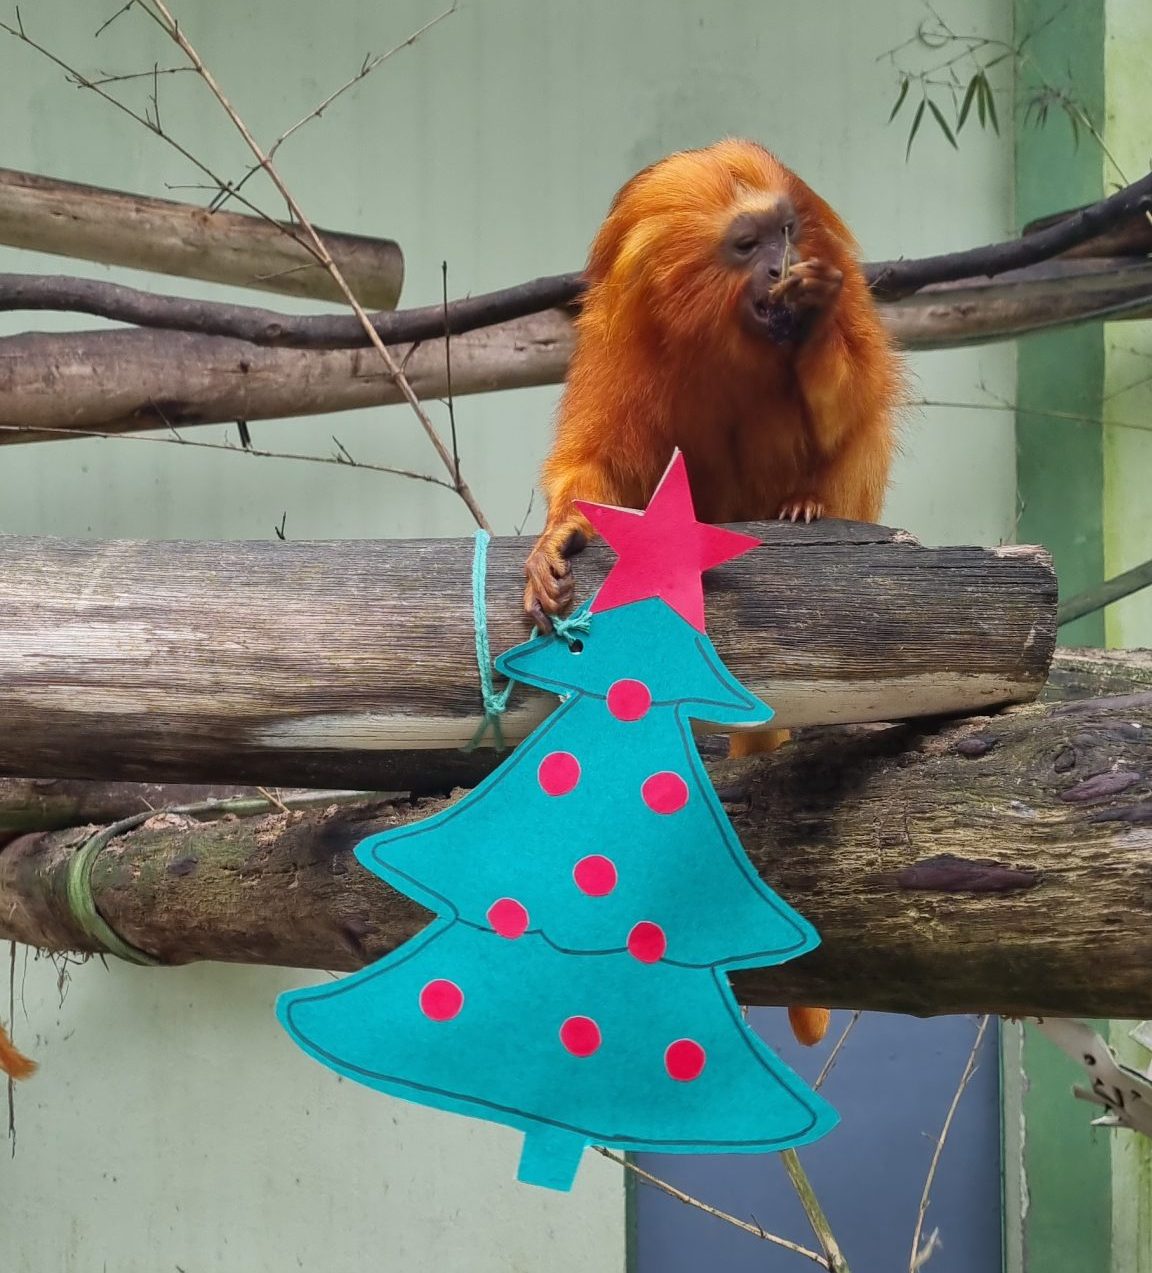 Pomerode Zoo Animals Receive Christmas Gifts - Disclosure/Zoo Pomerode/Reproduction/ND